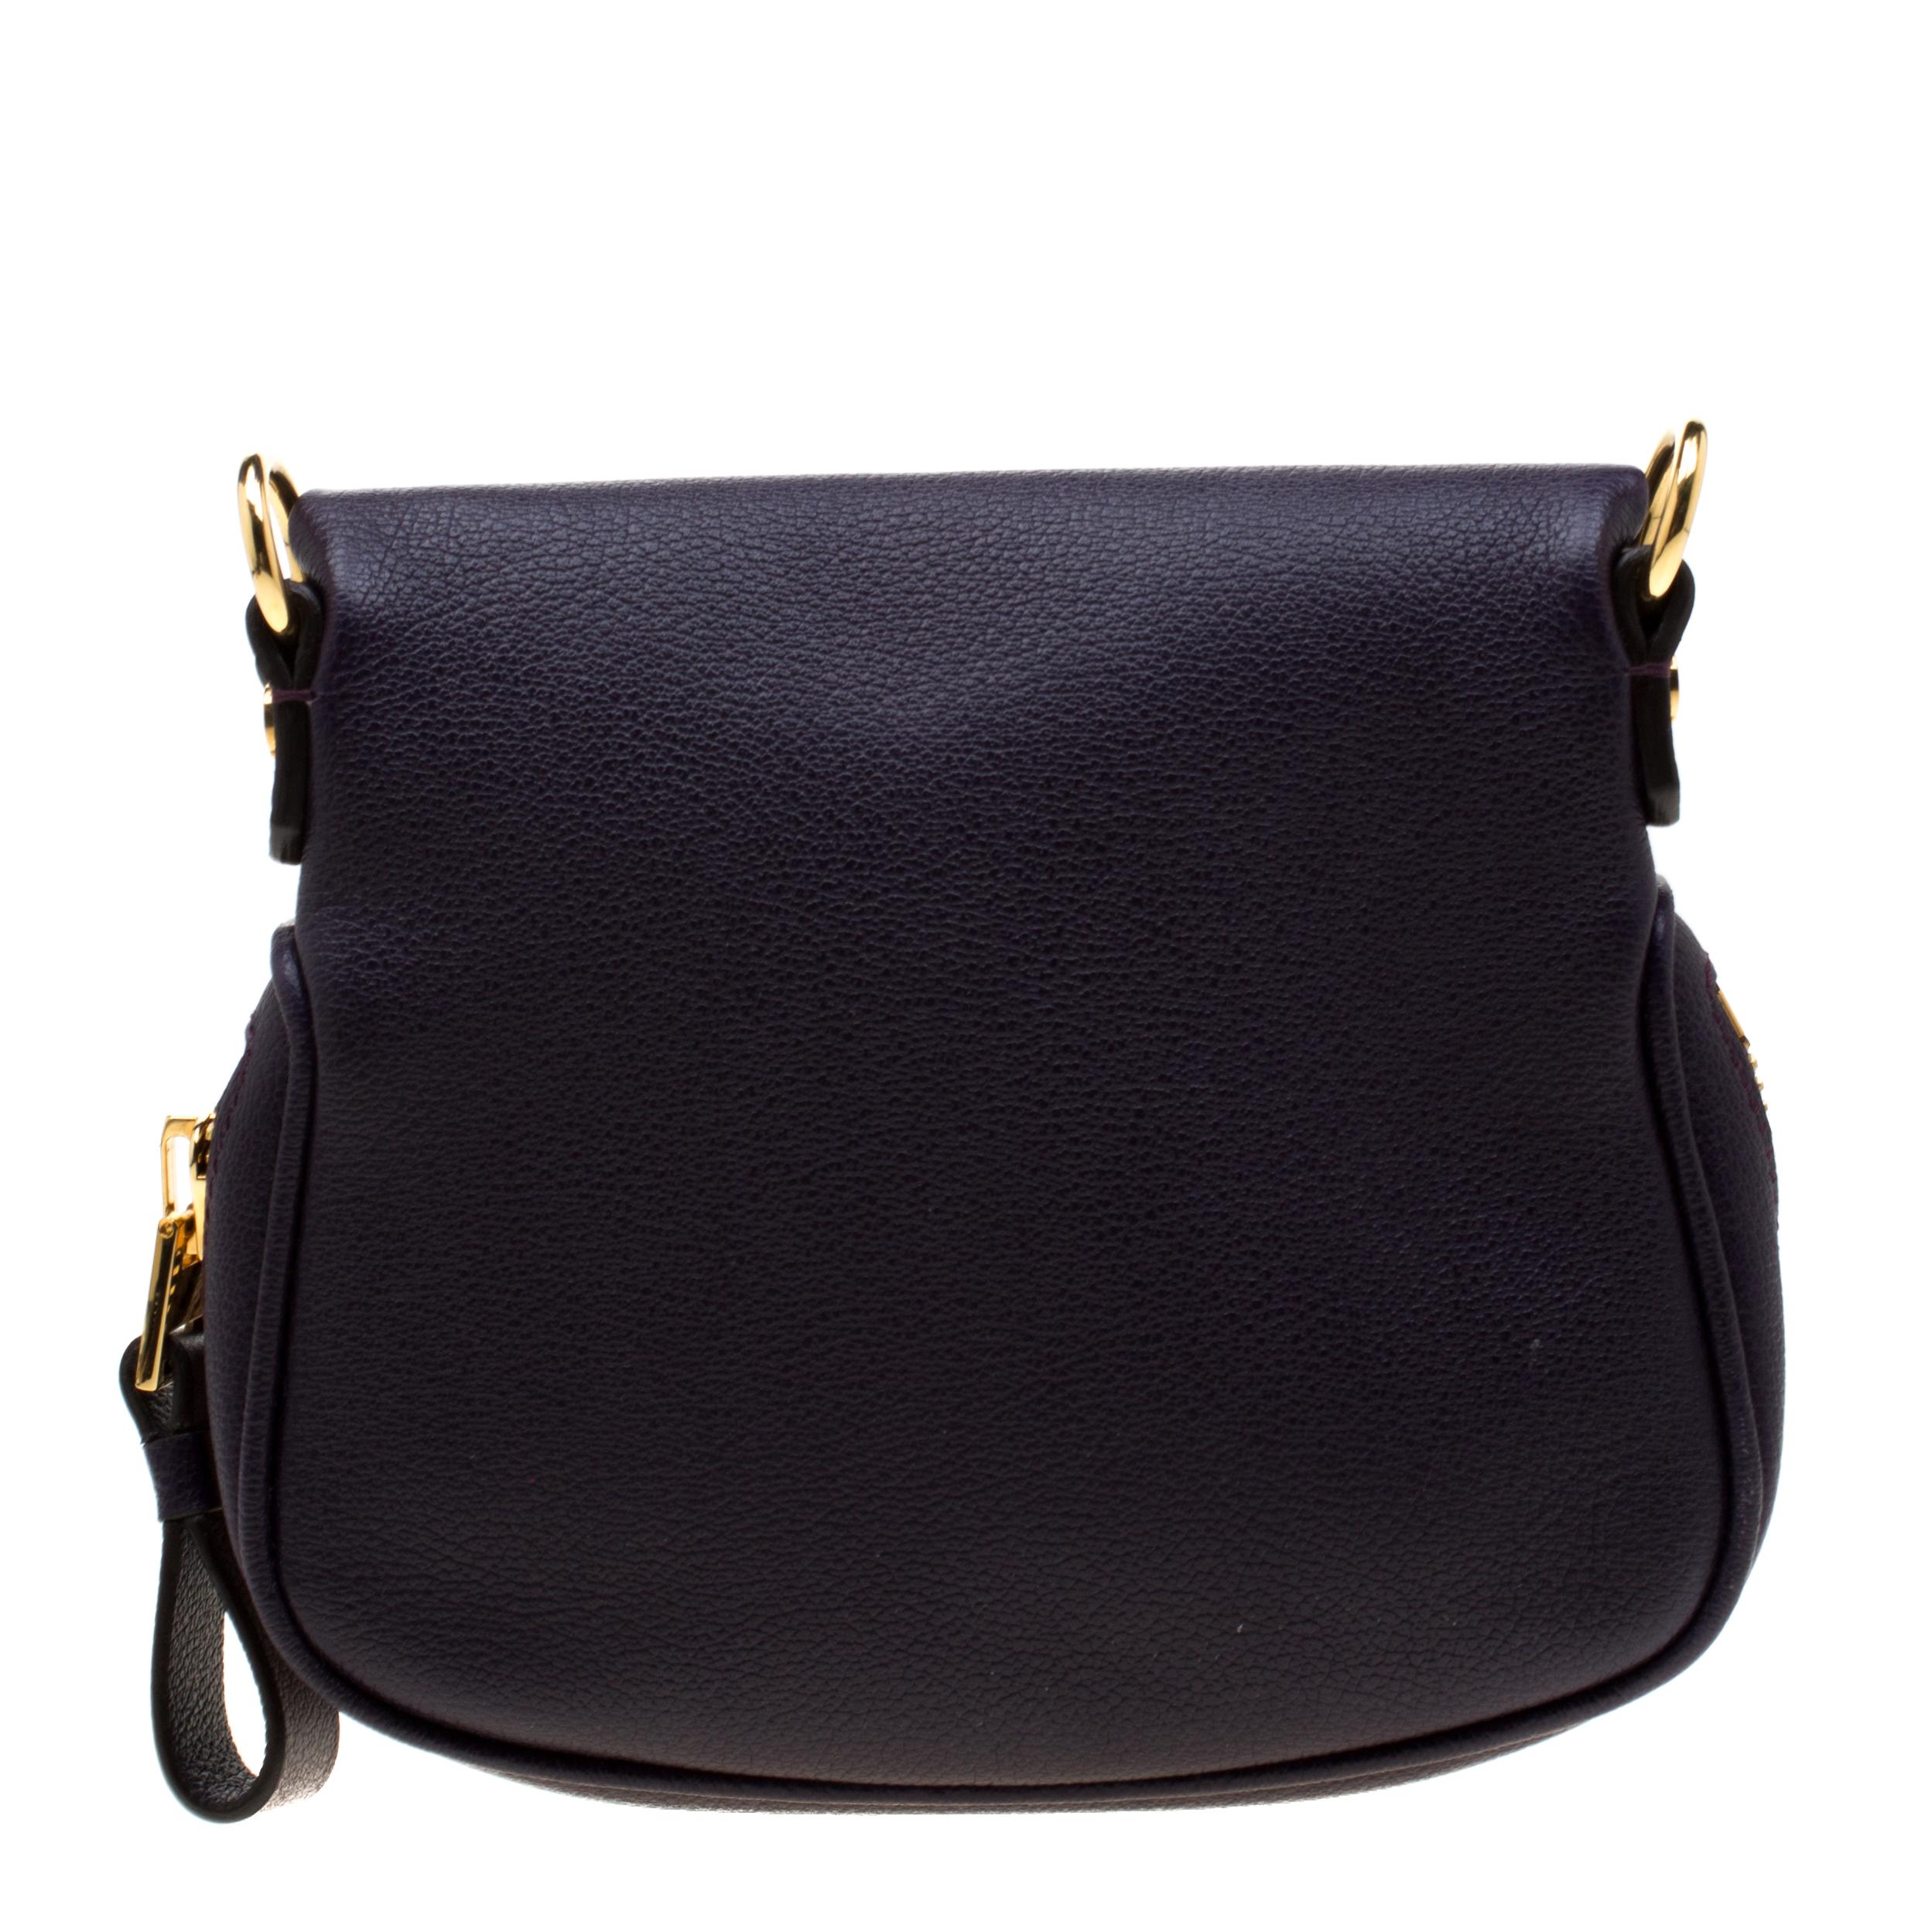 Start your weekend on a fashionable note with this purple bag. This trendy and classy creation by Tom Ford will surely fetch you a lot of compliments. It comes made from leather and equipped with zippers, a suede compartment and a shoulder